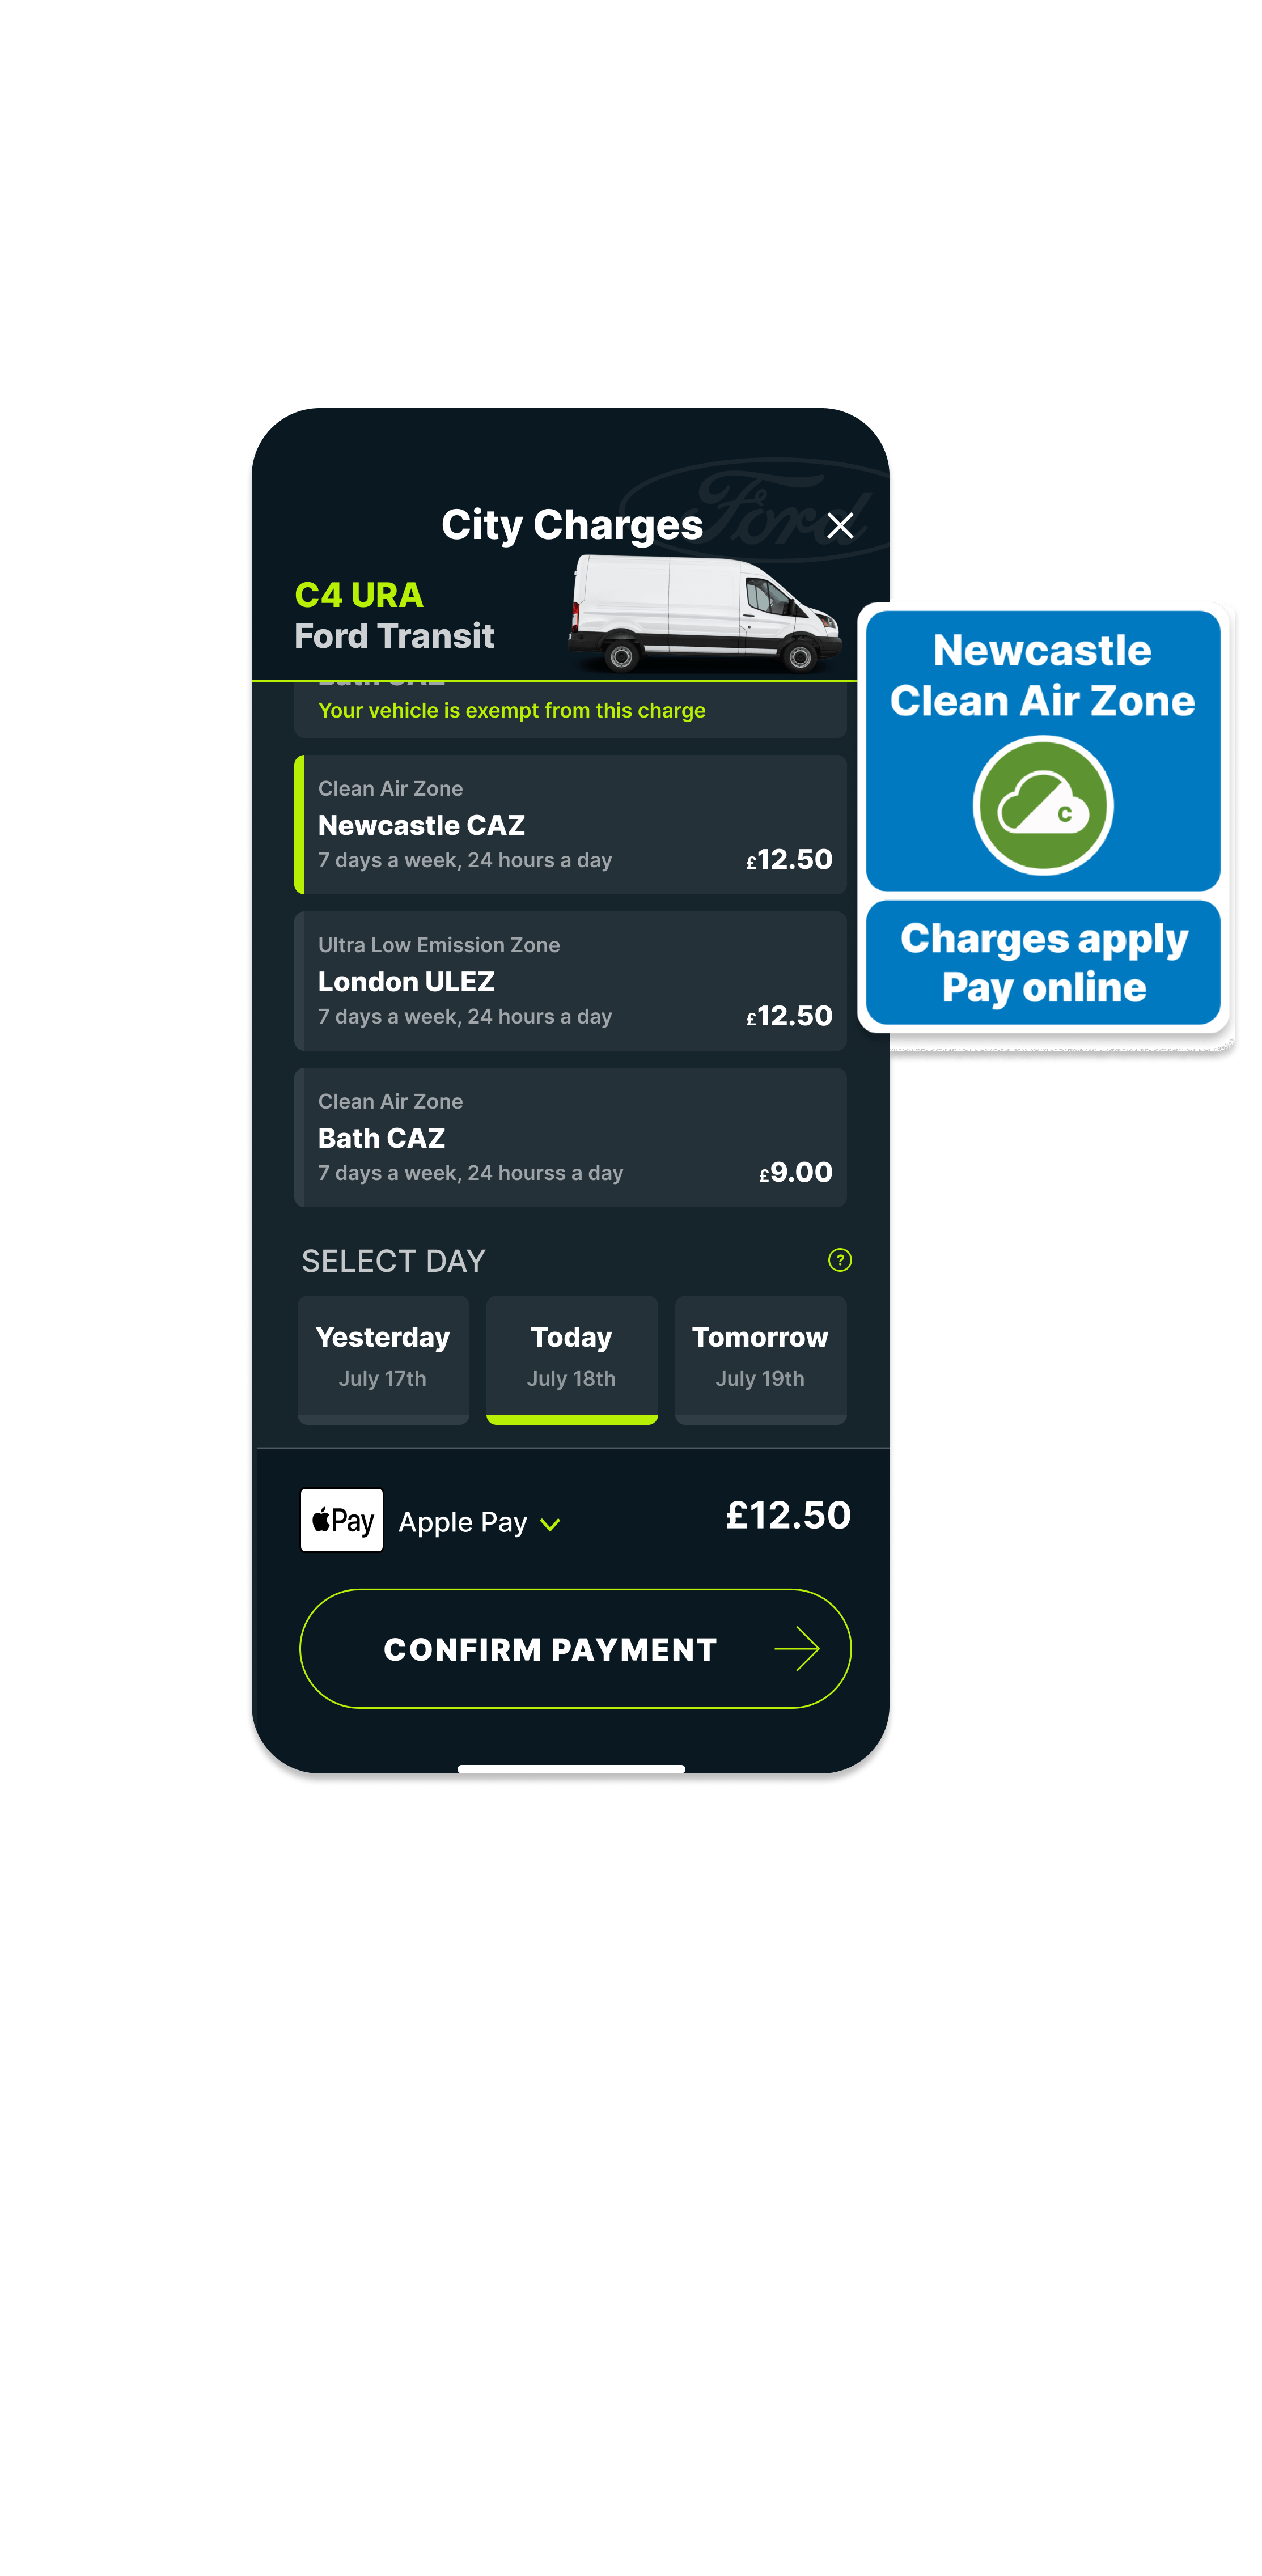 City Charges screen in the Caura app showing the Newcastle CAZ charge and CAZ road sign